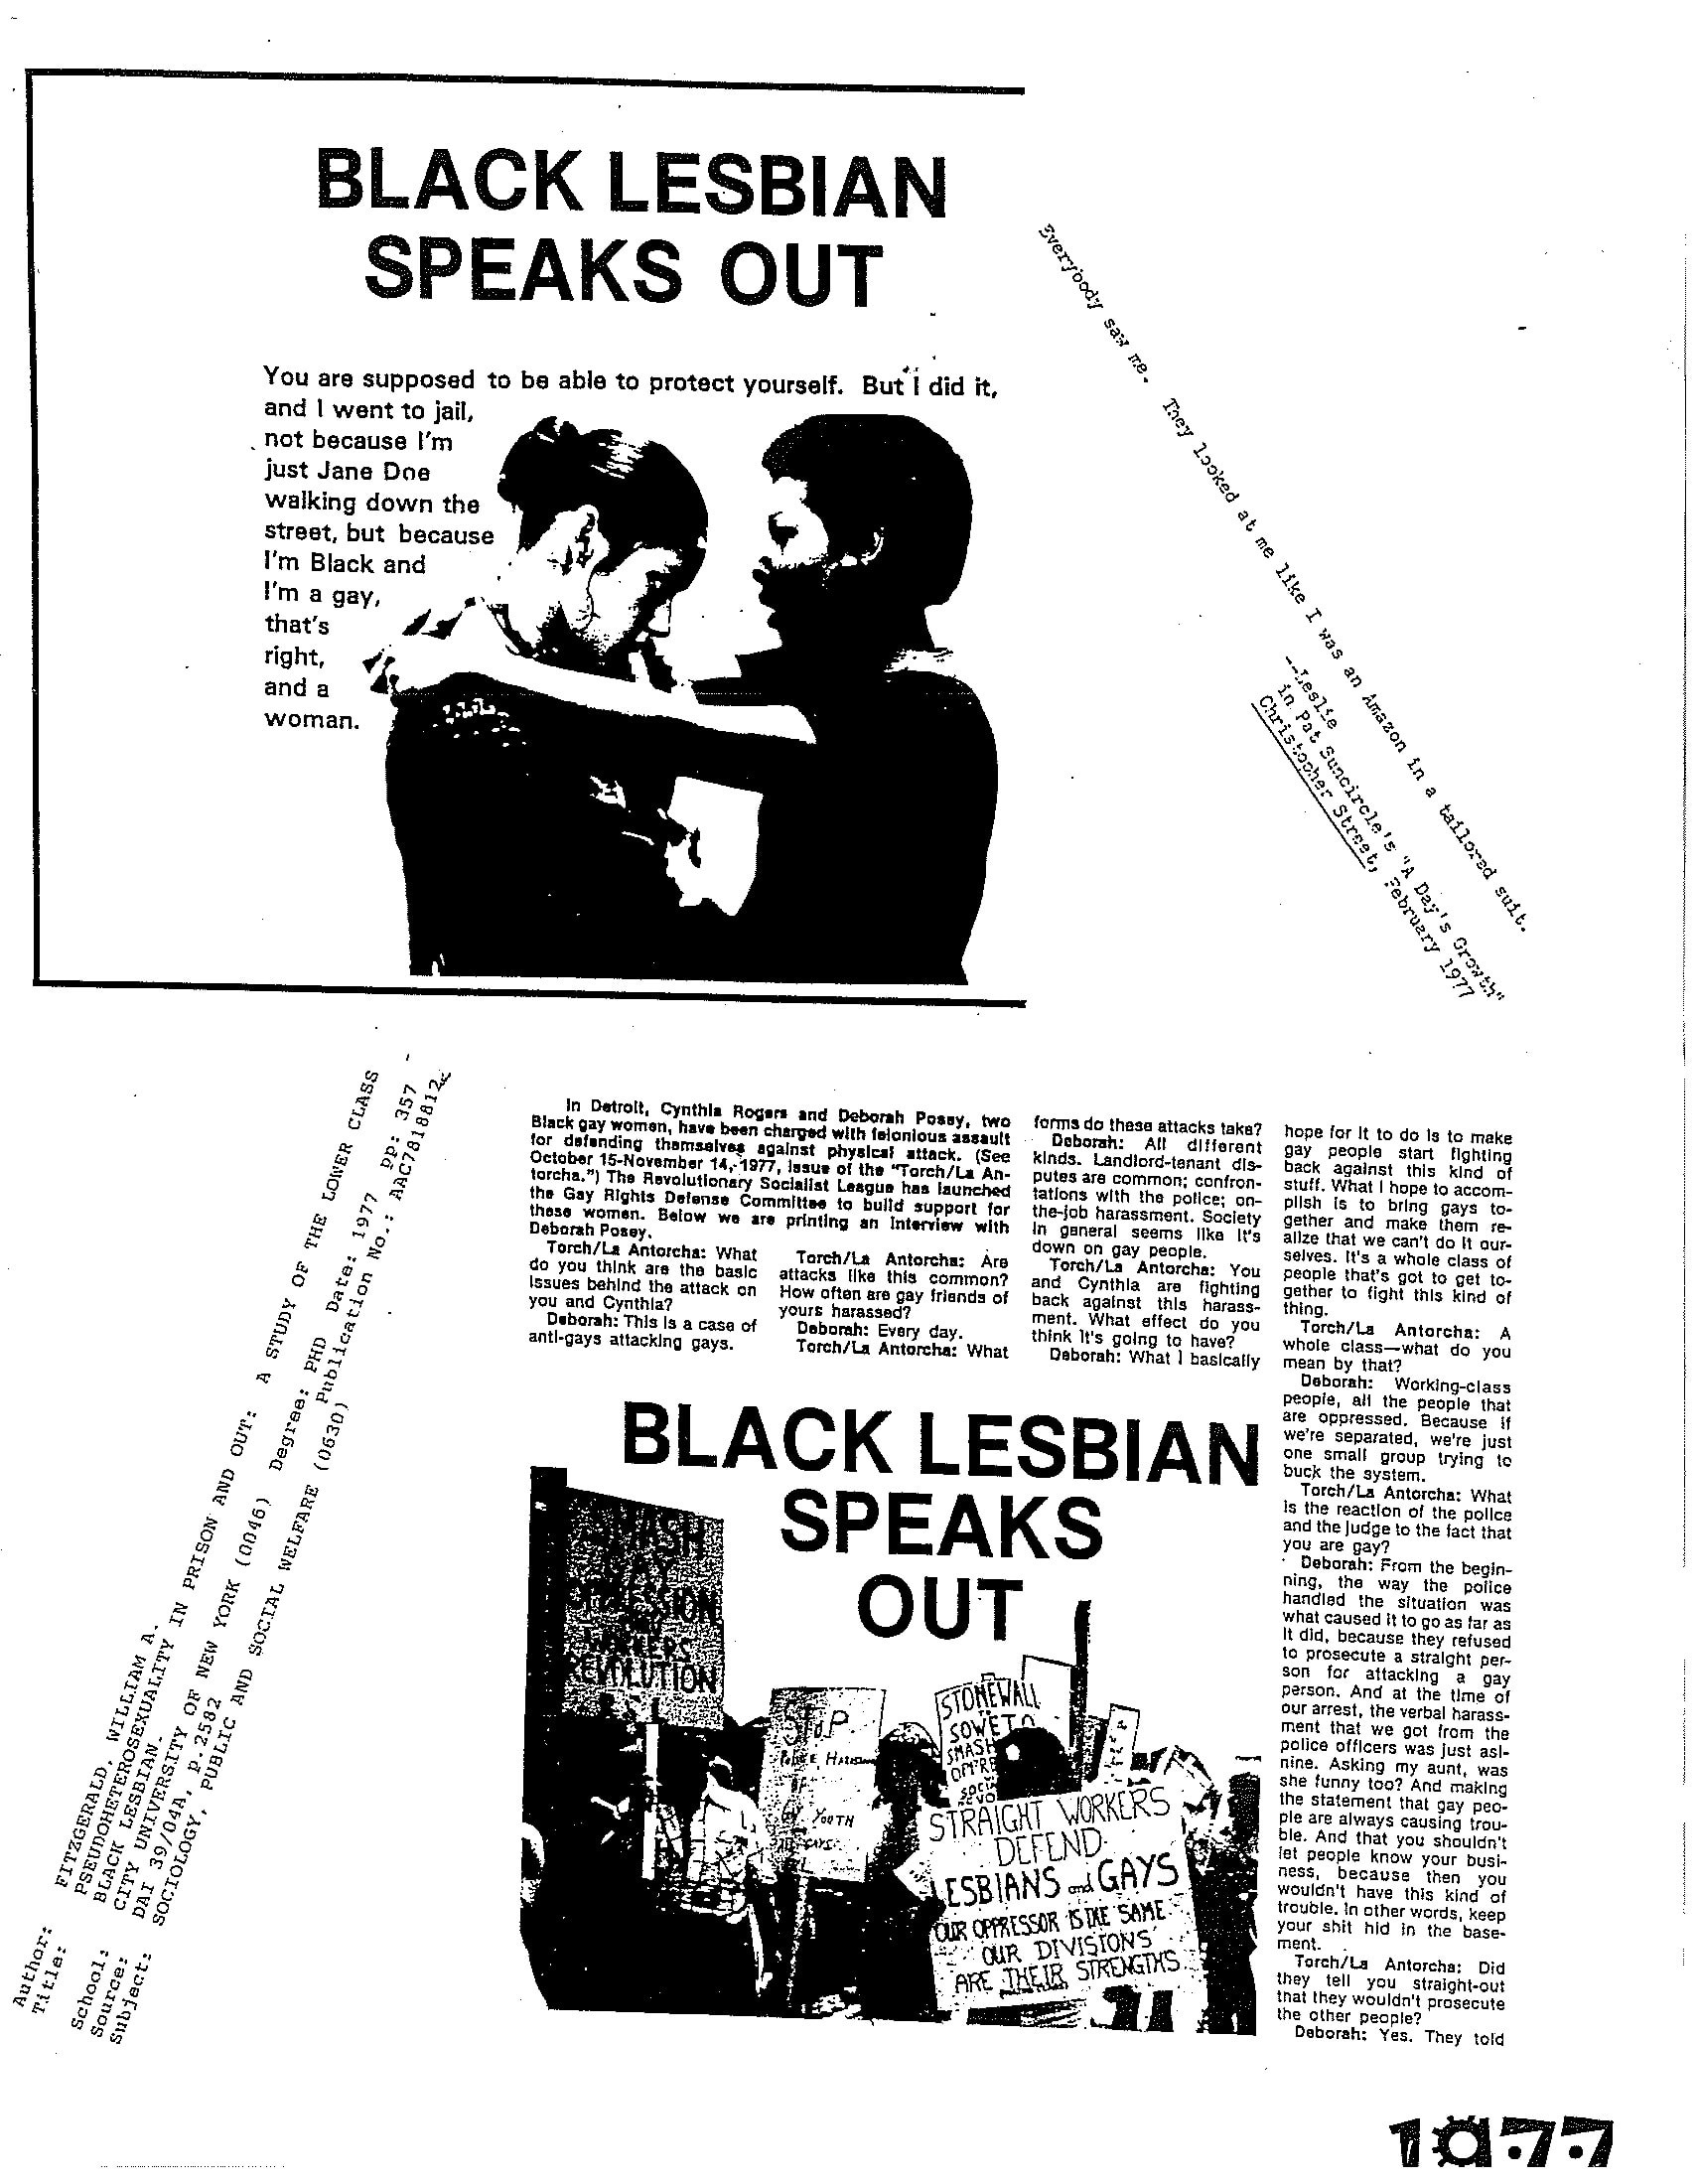 Collage of newsclippings and entries from a bibliography on Black lesbian topics. There is a photo of two women with their arms around one another and a photo of people protesting.